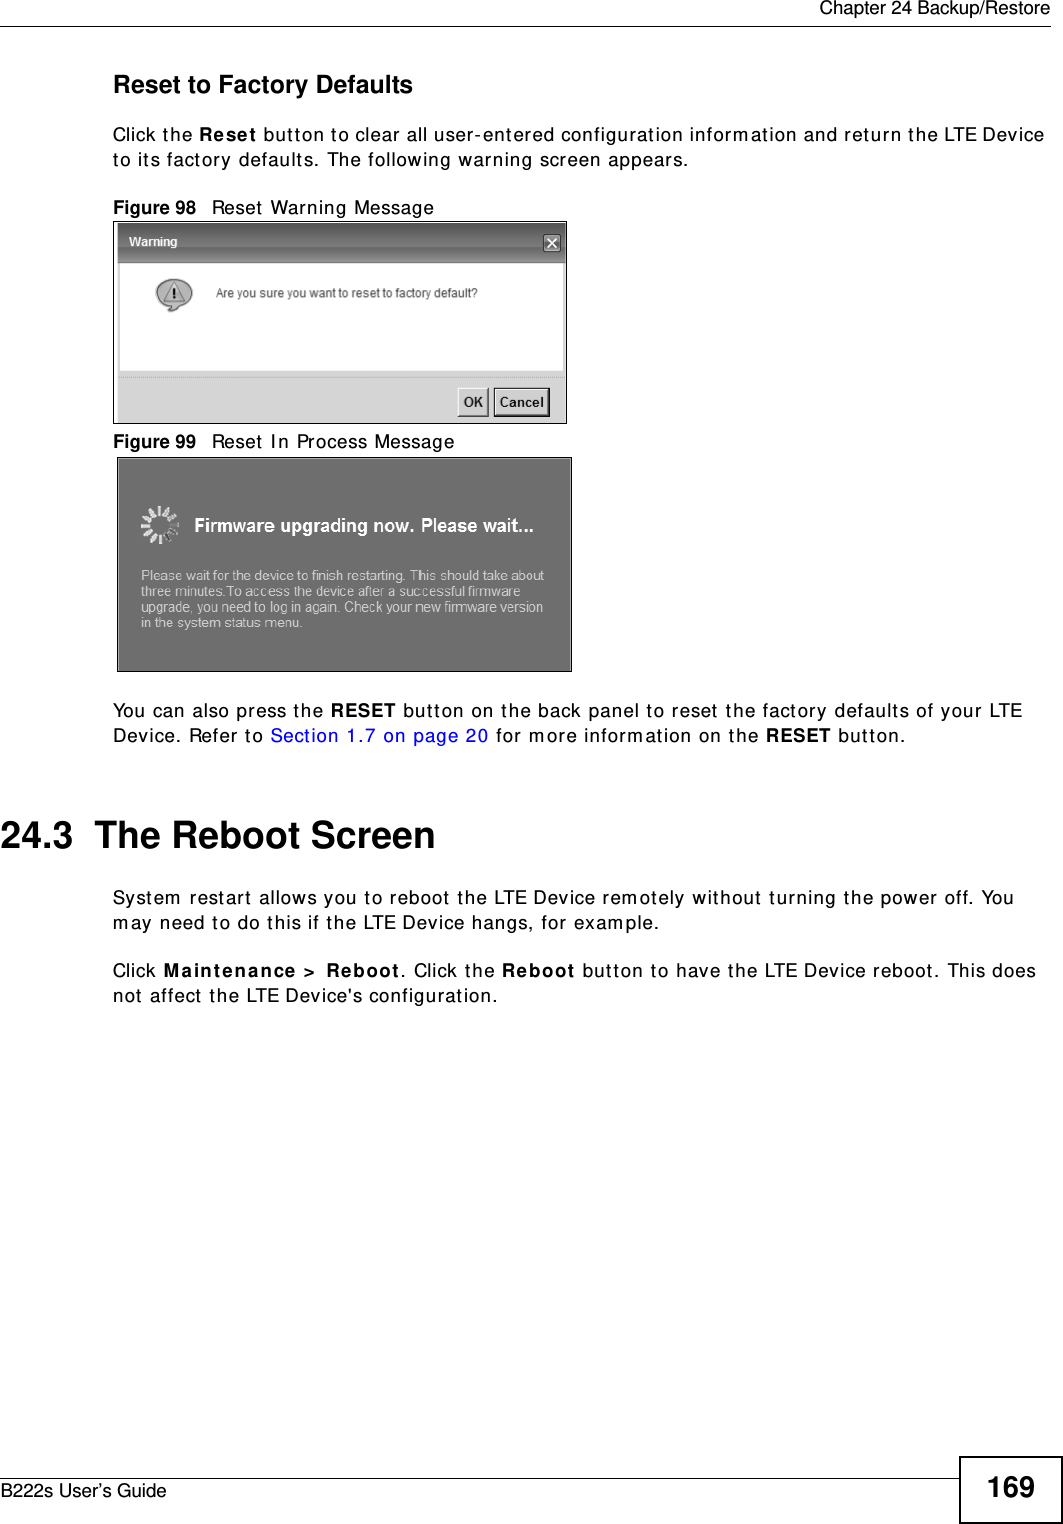  Chapter 24 Backup/RestoreB222s User’s Guide 169Reset to Factory Defaults  Click t he Re se t  but t on t o clear all user- ent ered configurat ion inform at ion and ret urn the LTE Device to it s fact ory default s. The following warning screen appears.Figure 98   Reset Warning MessageFigure 99   Reset I n Process MessageYou can also press t he RESET but t on on t he back panel t o reset  t he fact ory default s of your LTE Device. Refer to Section 1.7 on page 20 for m ore inform at ion on the RESET but ton.24.3  The Reboot Screen System  rest art  allows you t o reboot  t he LTE Device rem otely wit hout  t urning t he power off. You m ay need t o do t his if t he LTE Device hangs, for exam ple.Click M a int e n a n ce &gt;  Reboot . Click the Re boot  but ton t o have the LTE Device r eboot . This does not  affect  t he LTE Device&apos;s configurat ion. 